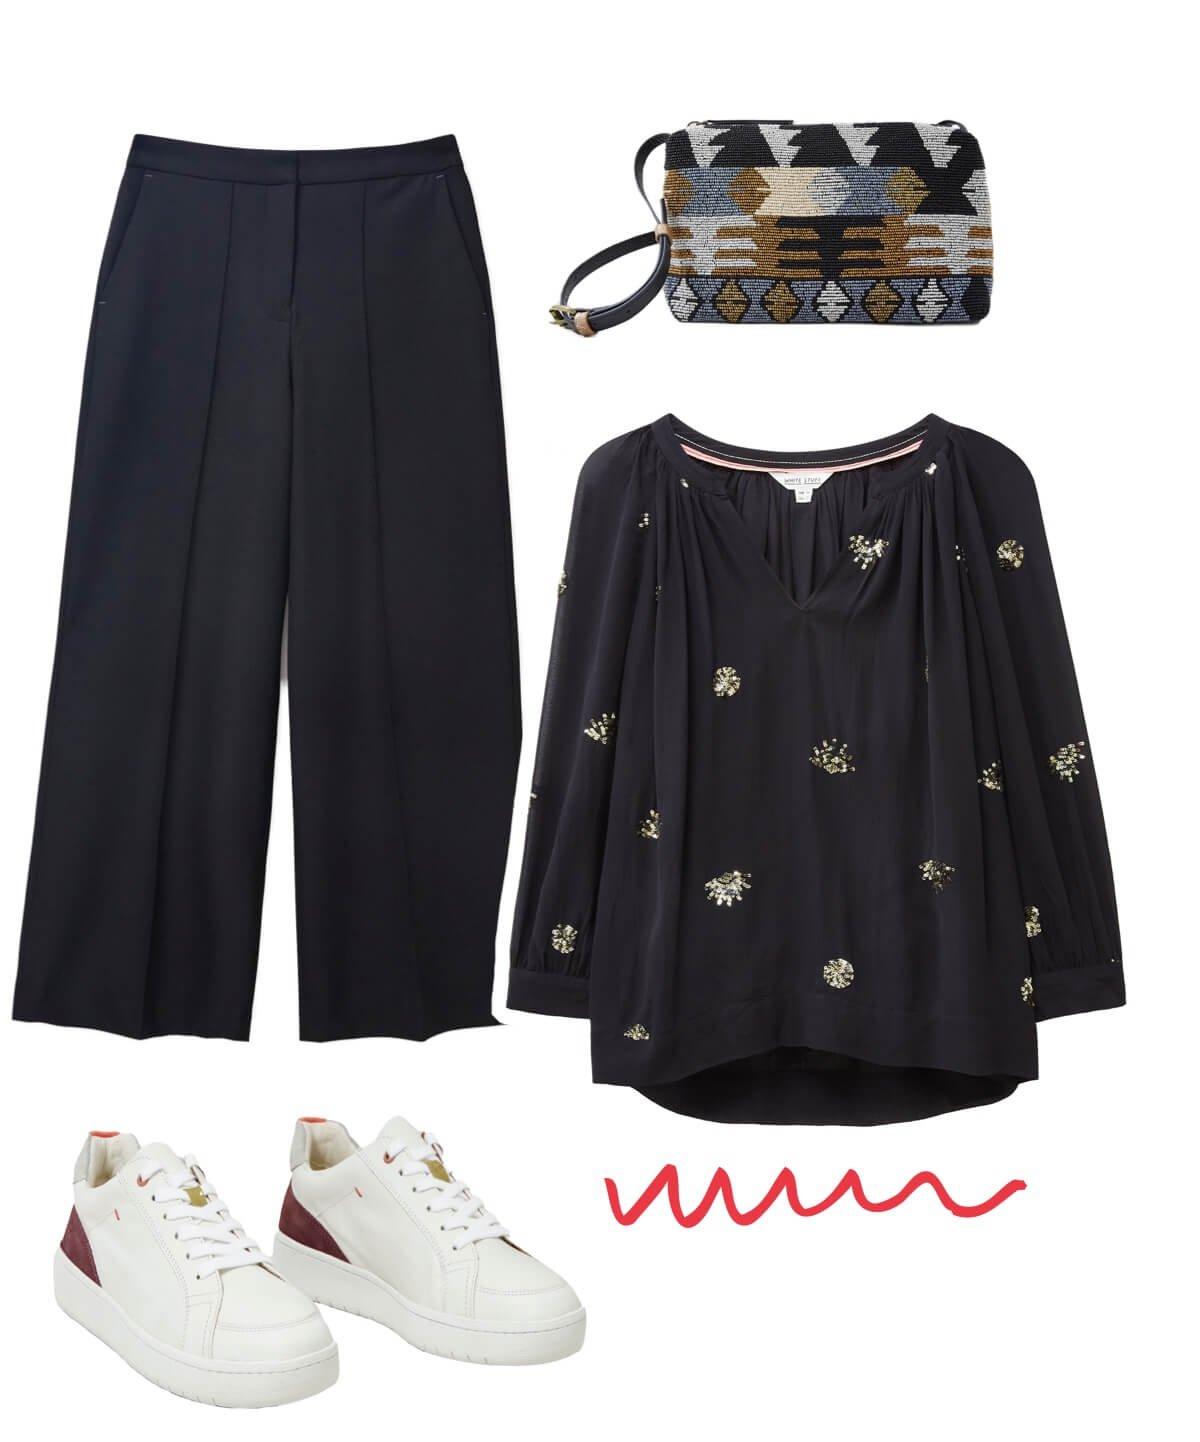 christmaspartywearguide_outfit4